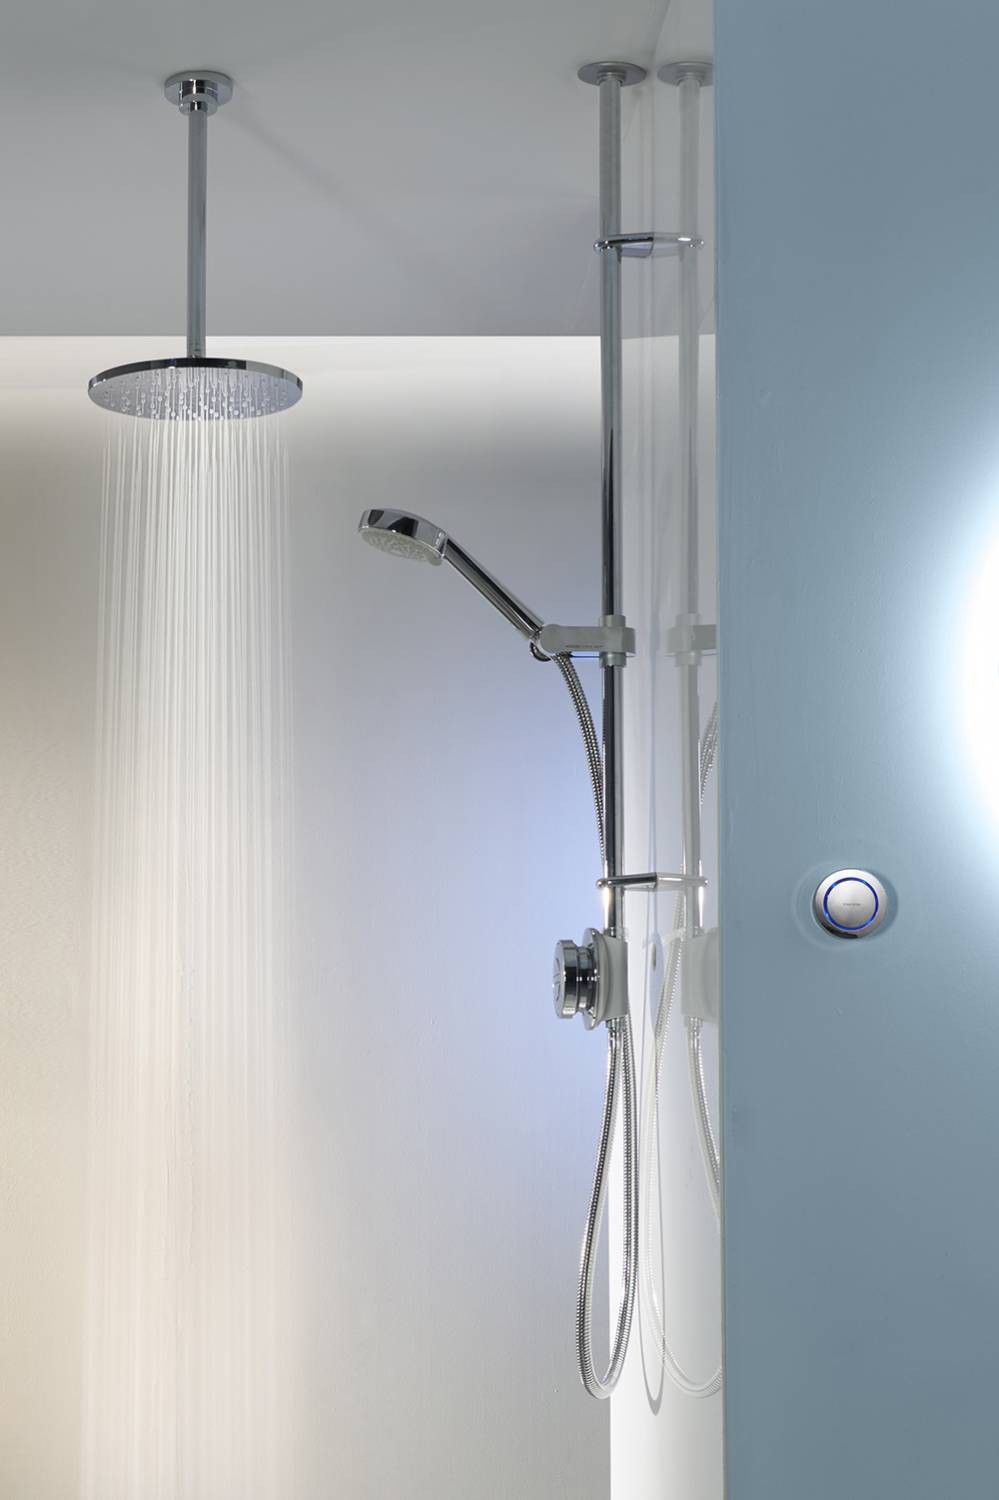 Quartz - Digital Divert Exposed With Adjustable Head And Ceiling Fixed Drencher